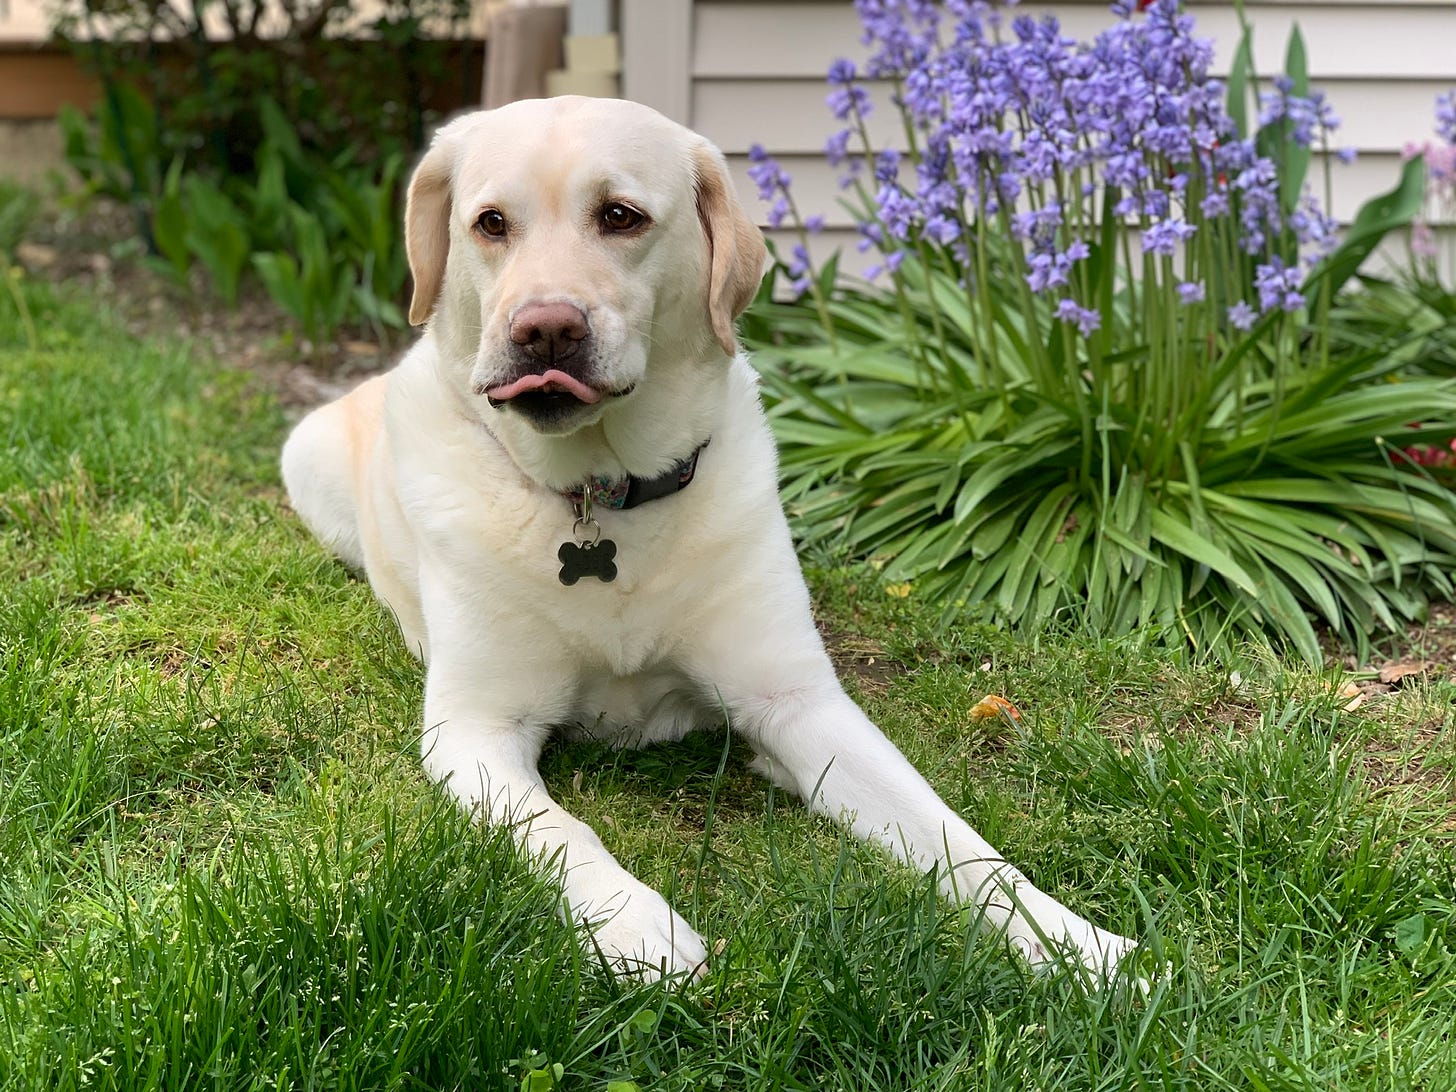 A yellow Labrador retriever licks her lips and lays in the grass in front of somme purple flowers.